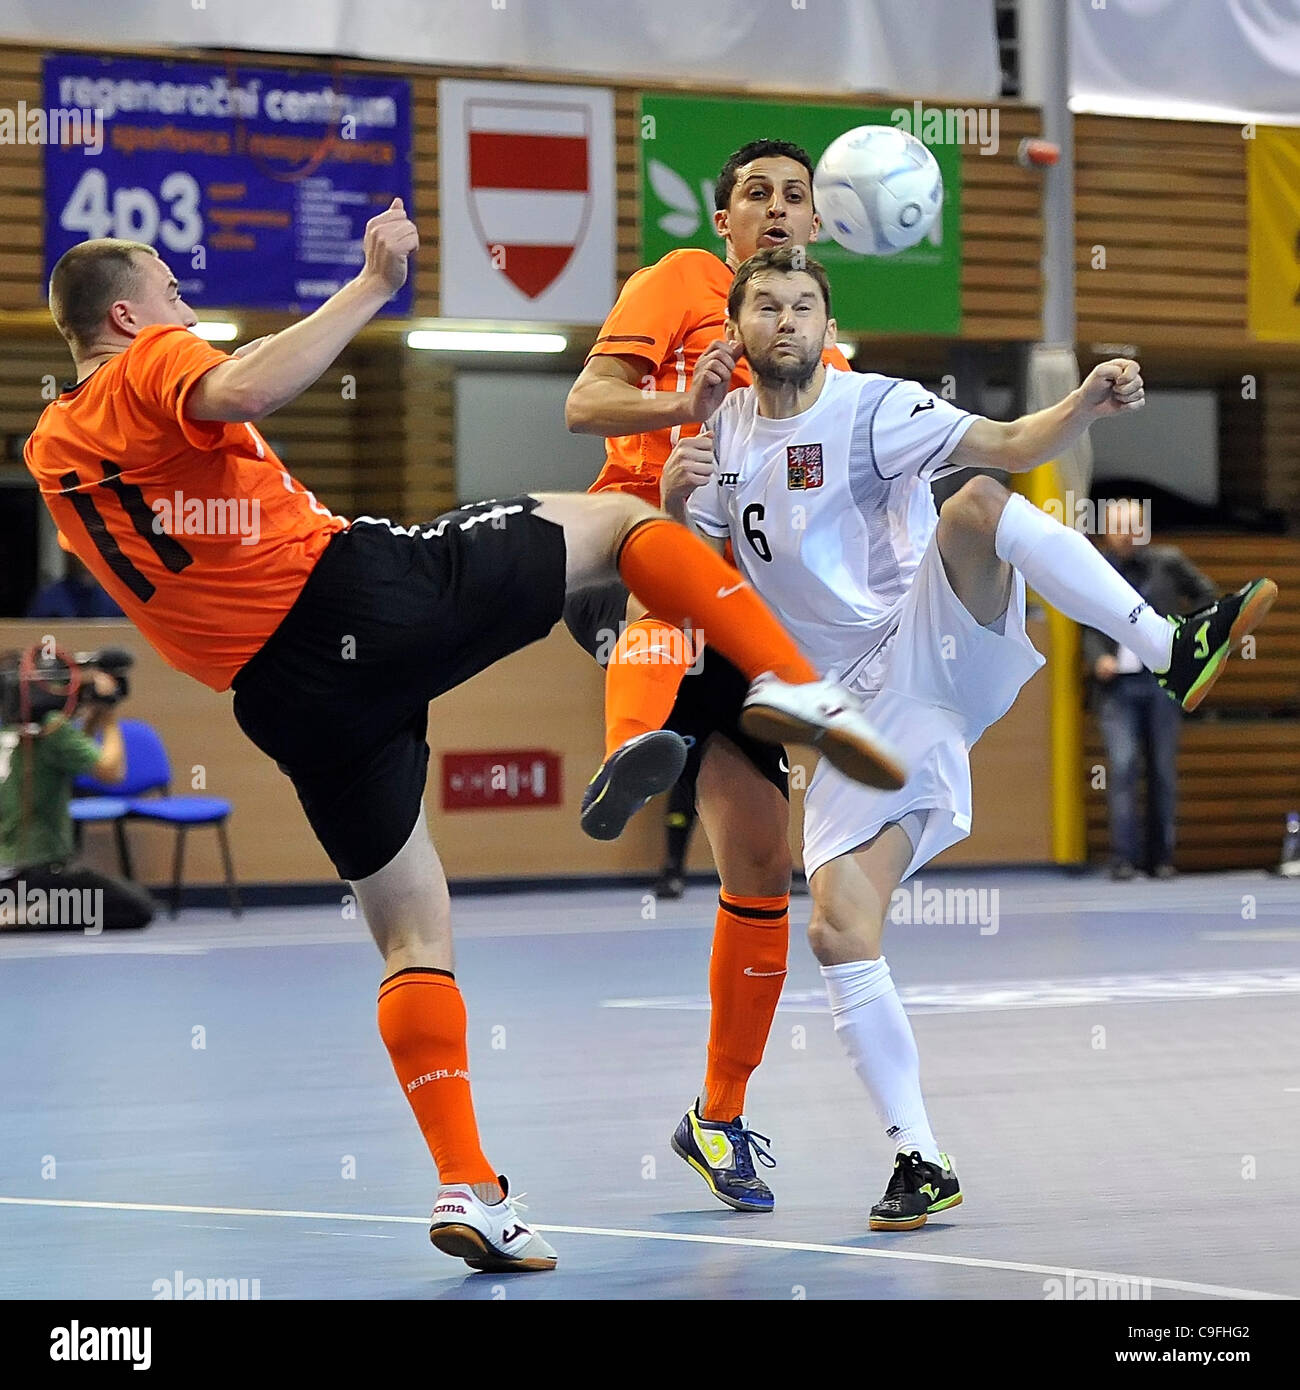 Netherlands Dick Hulshorst (left to right) and Omar Nejjari and Czech Roman Mares during the World Futsal Championships qualification match Czech Republic vs Netherlands in Brno, Czech Republic, on Thursday, December 15, 2011. (CTK Photo/Igor Sefr) Stock Photo